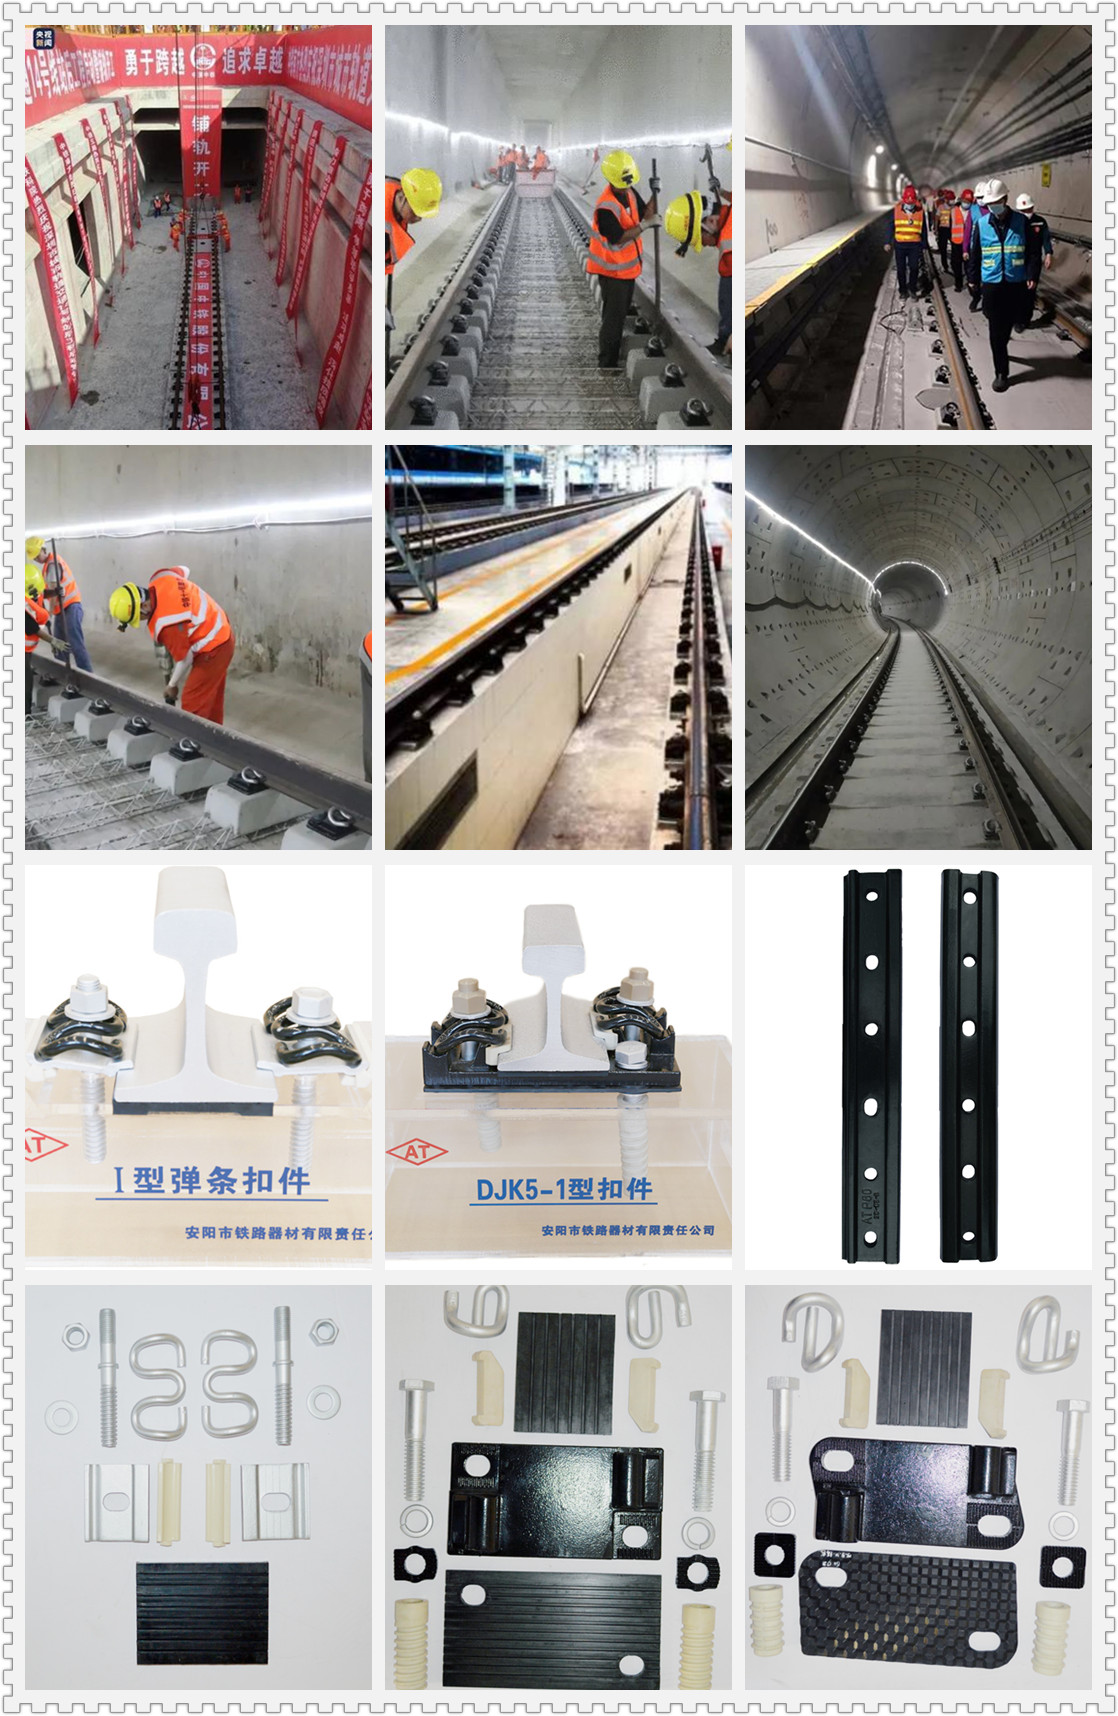 Anyang Railway Equipment Co., Ltd(AT) provided Rail Fasteners, Rail Fastening Systems, Rail Joint Bars for Shenzhen Metro(Subway)